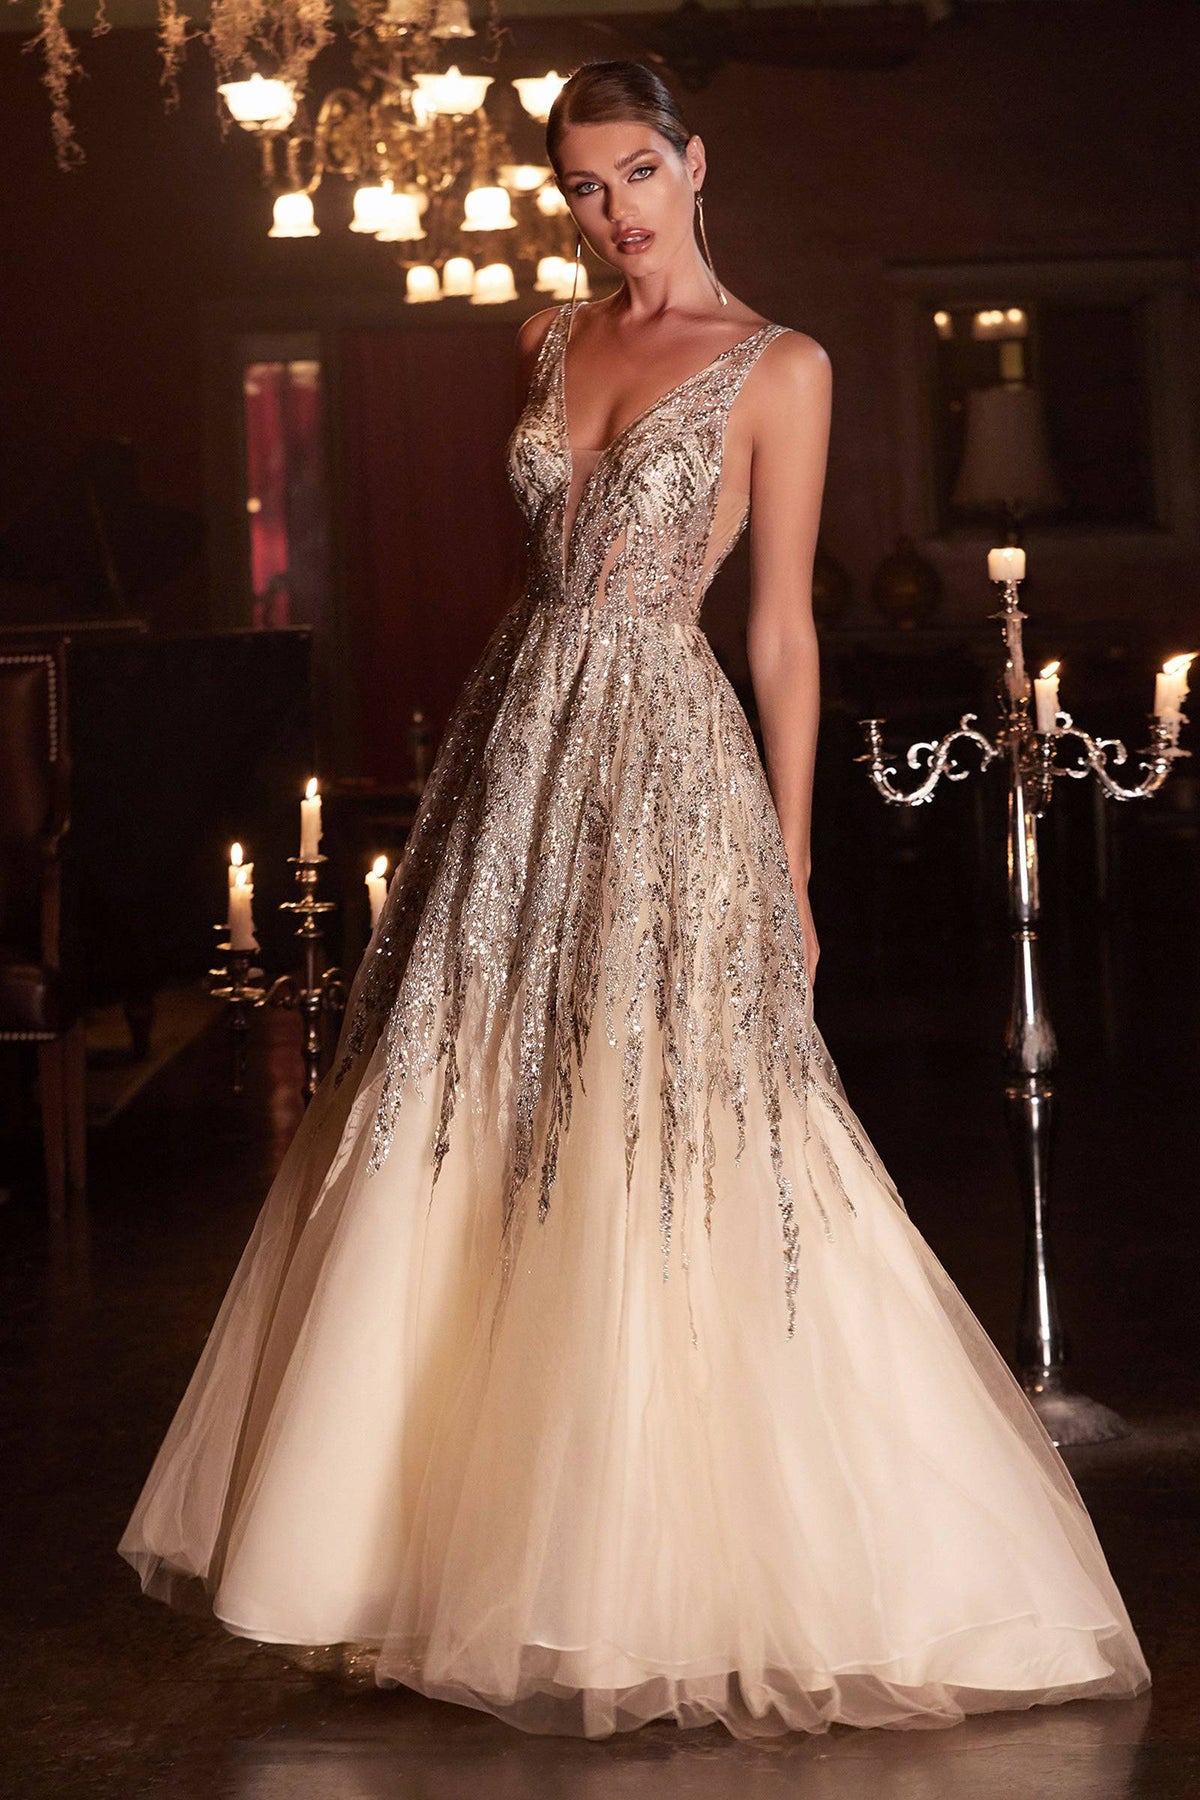 Cinderella Divine C135 Gorgeous Sequin Ball Gown - NORMA REED